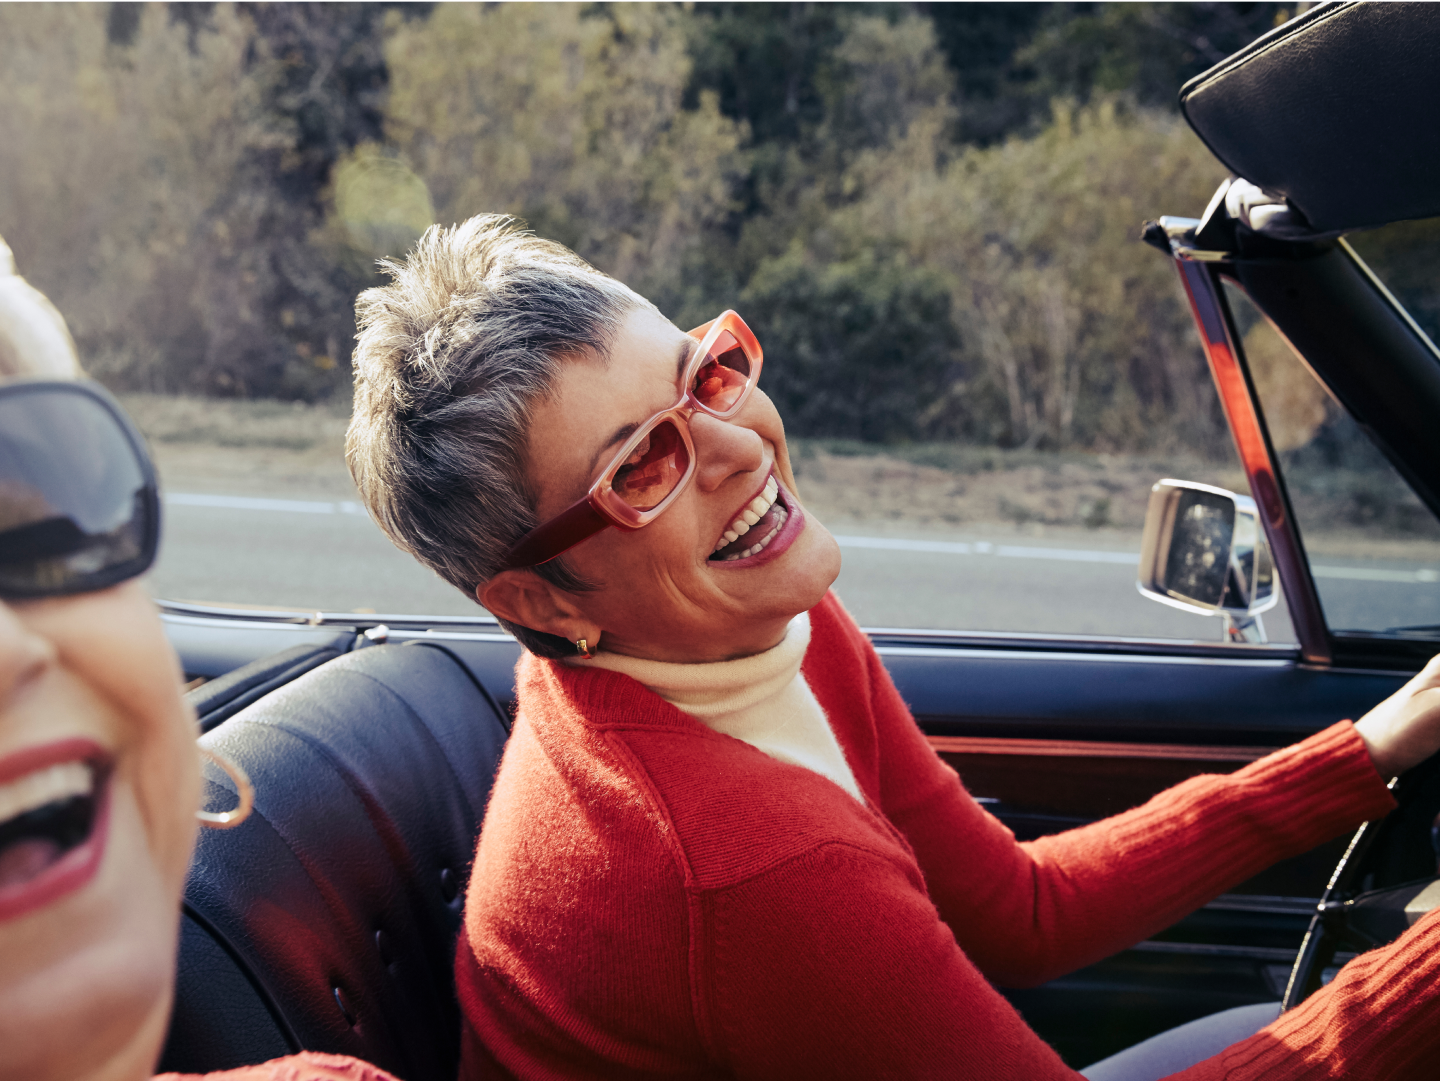 Outdoors - Two women laughing in a car